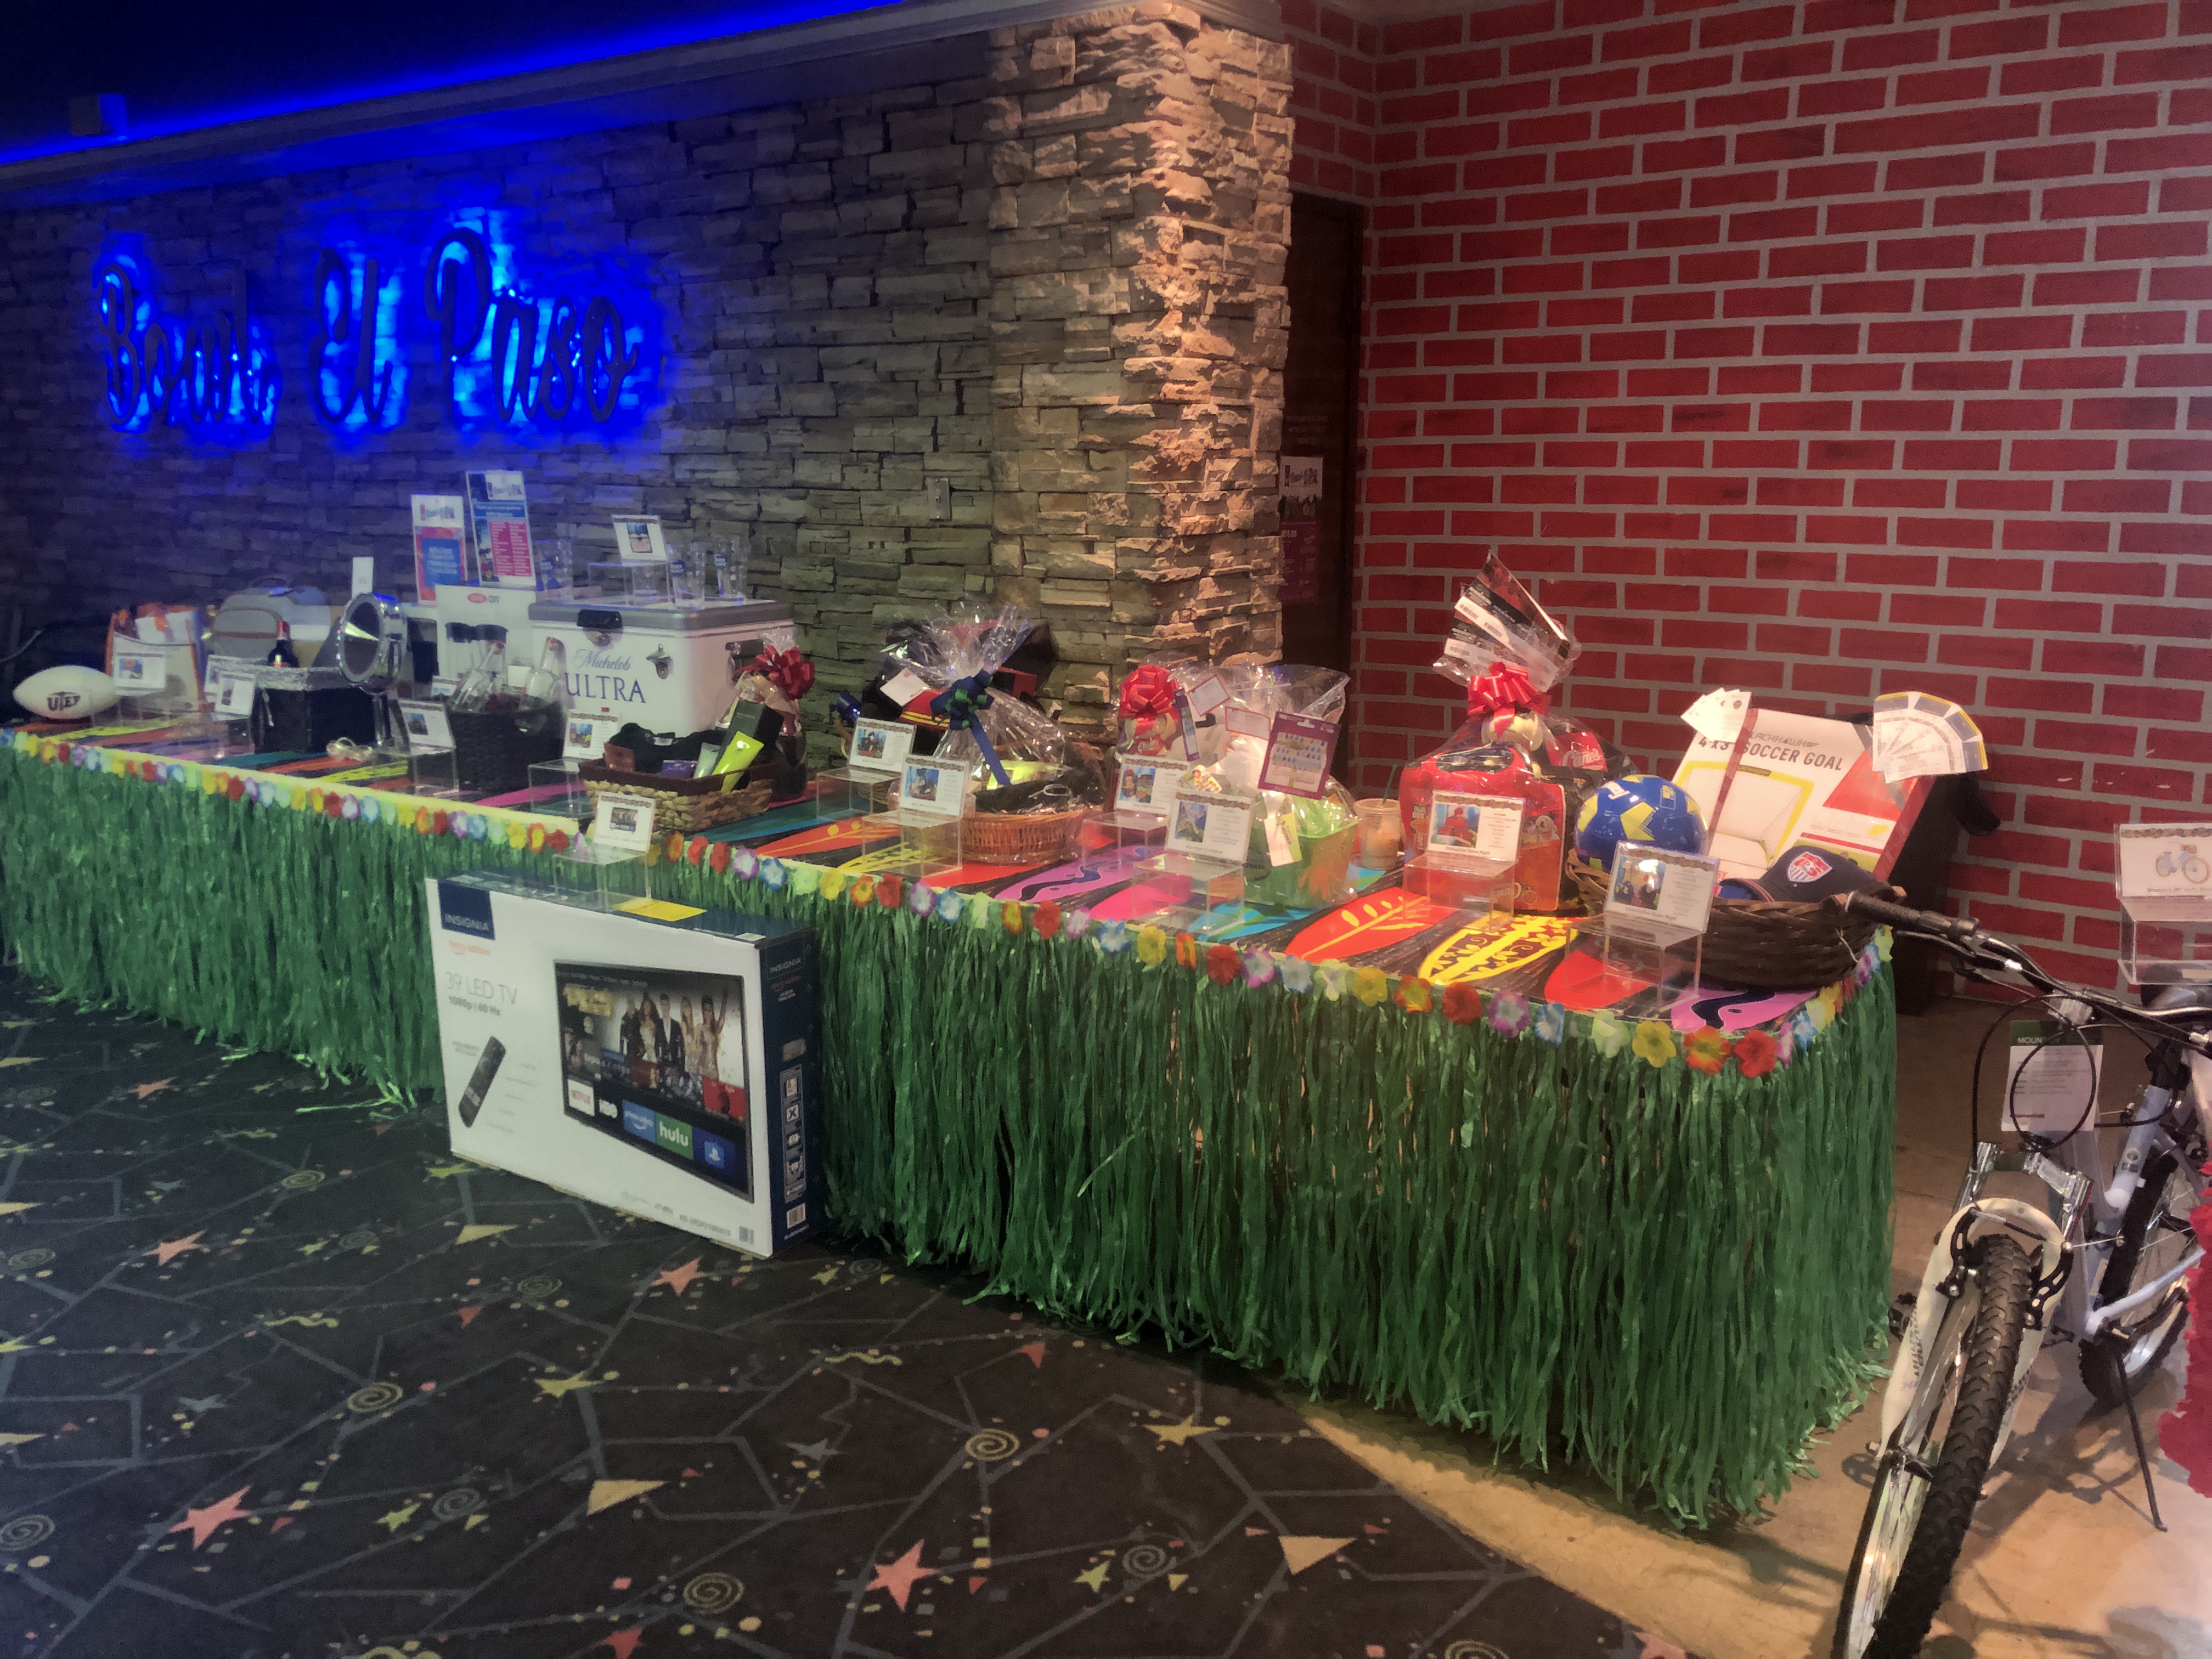 Can we say "WOW" to this Raffle table!